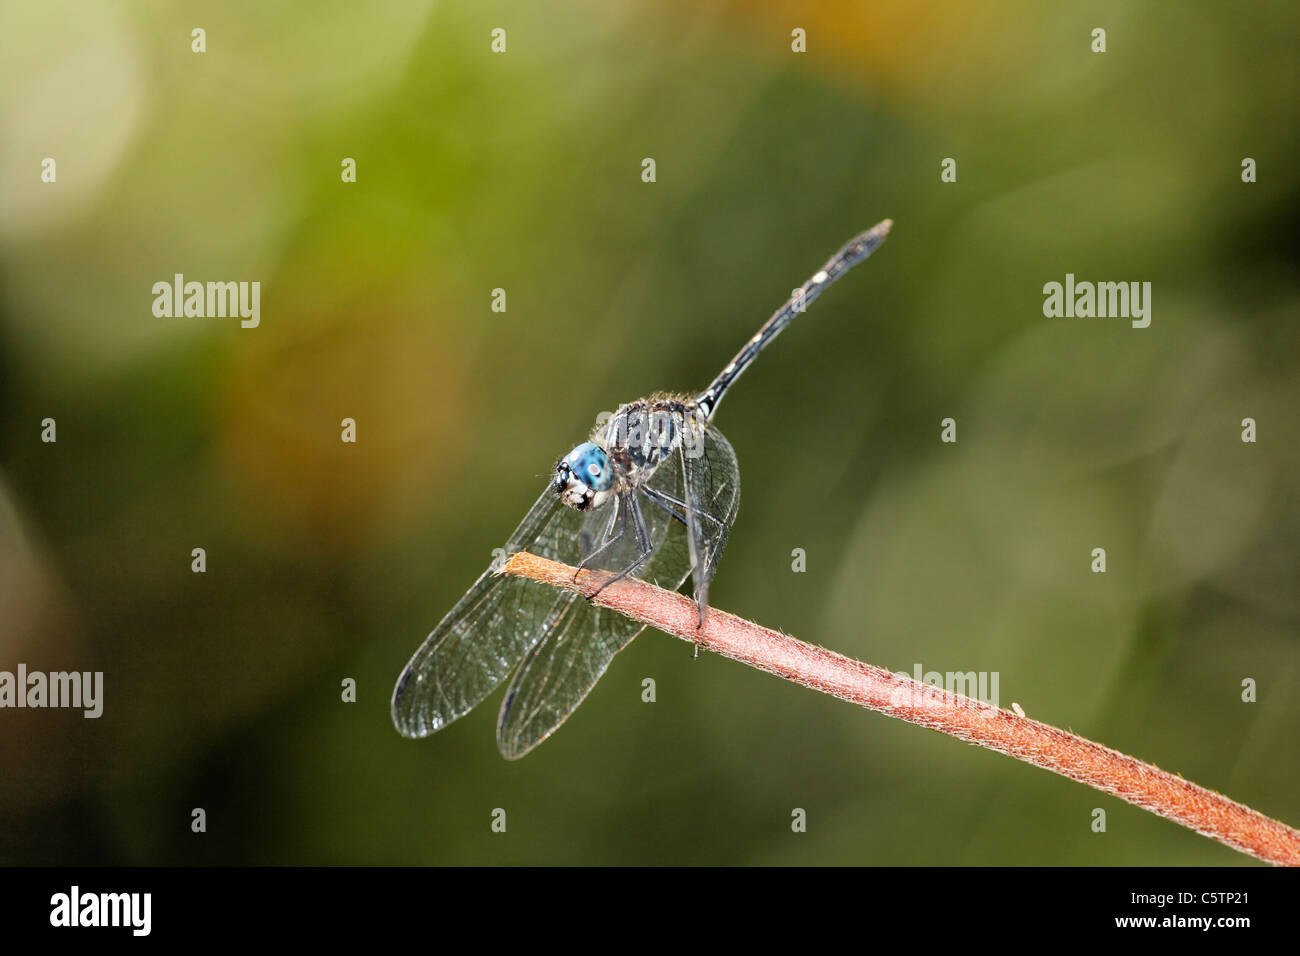 Costa Rica, Dragonfly on twig Banque D'Images